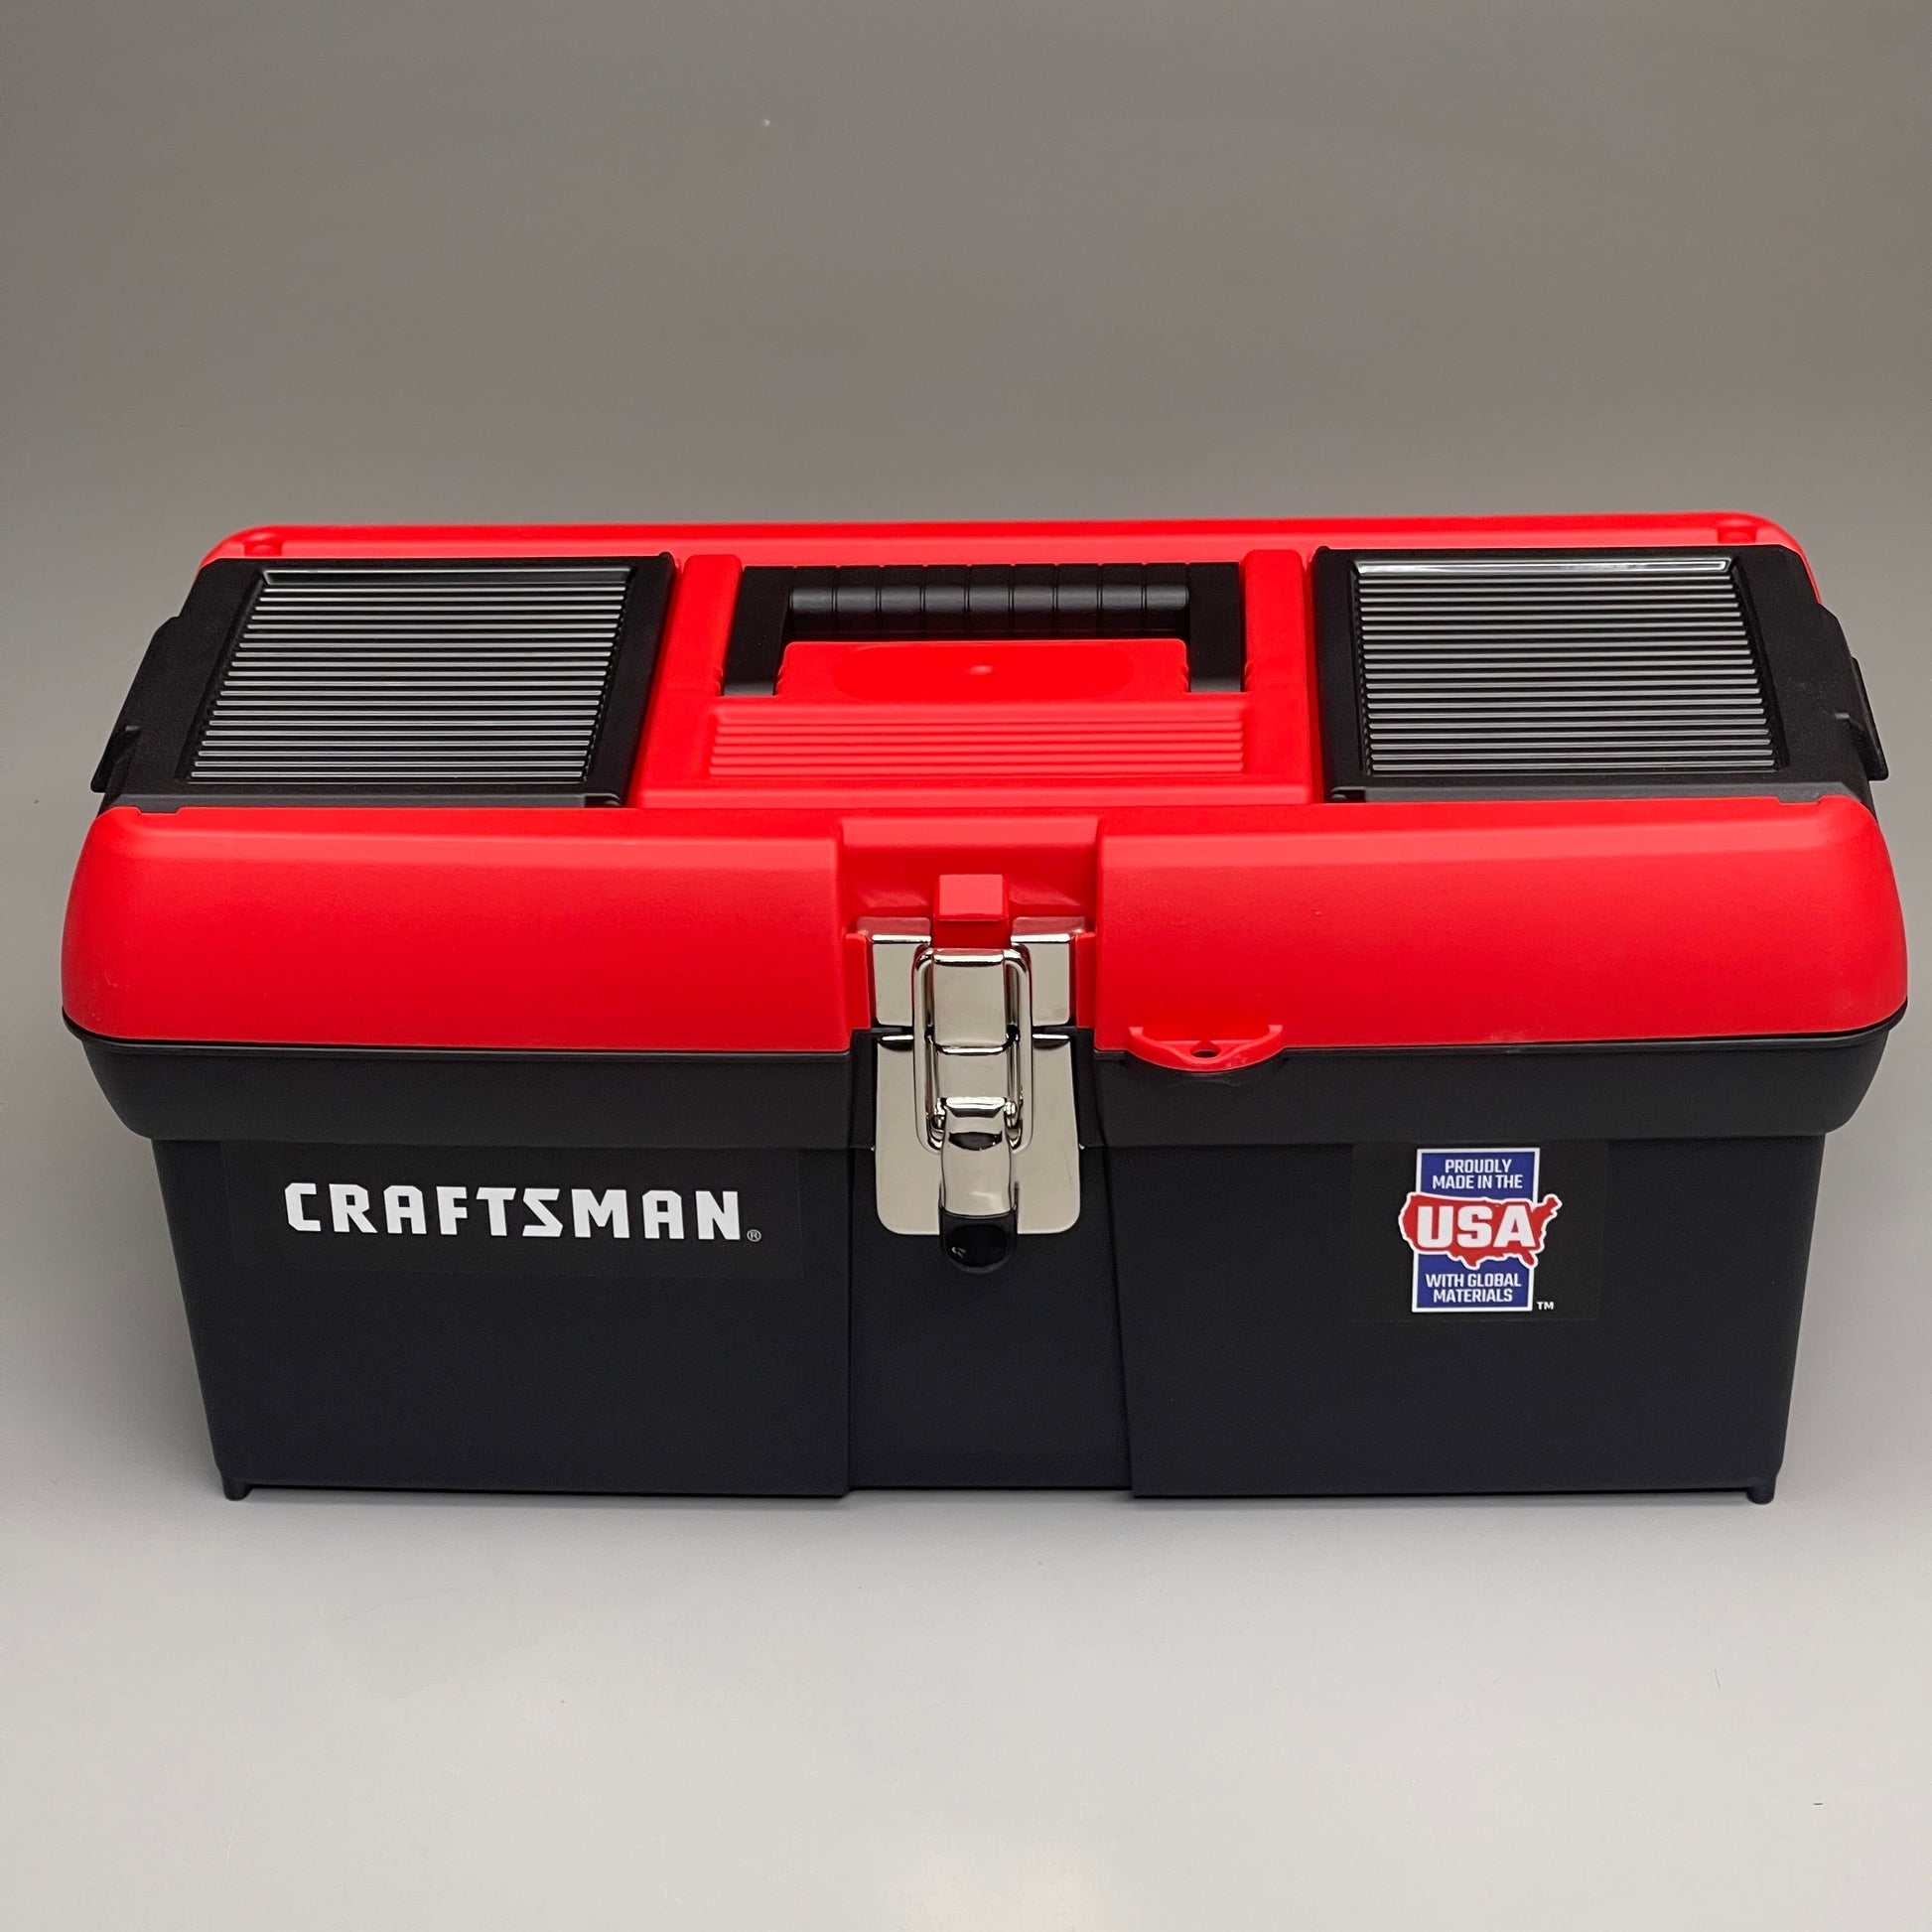 CRAFTSMAN Classic Tool Box - 16-in - Black and Red CMST16005